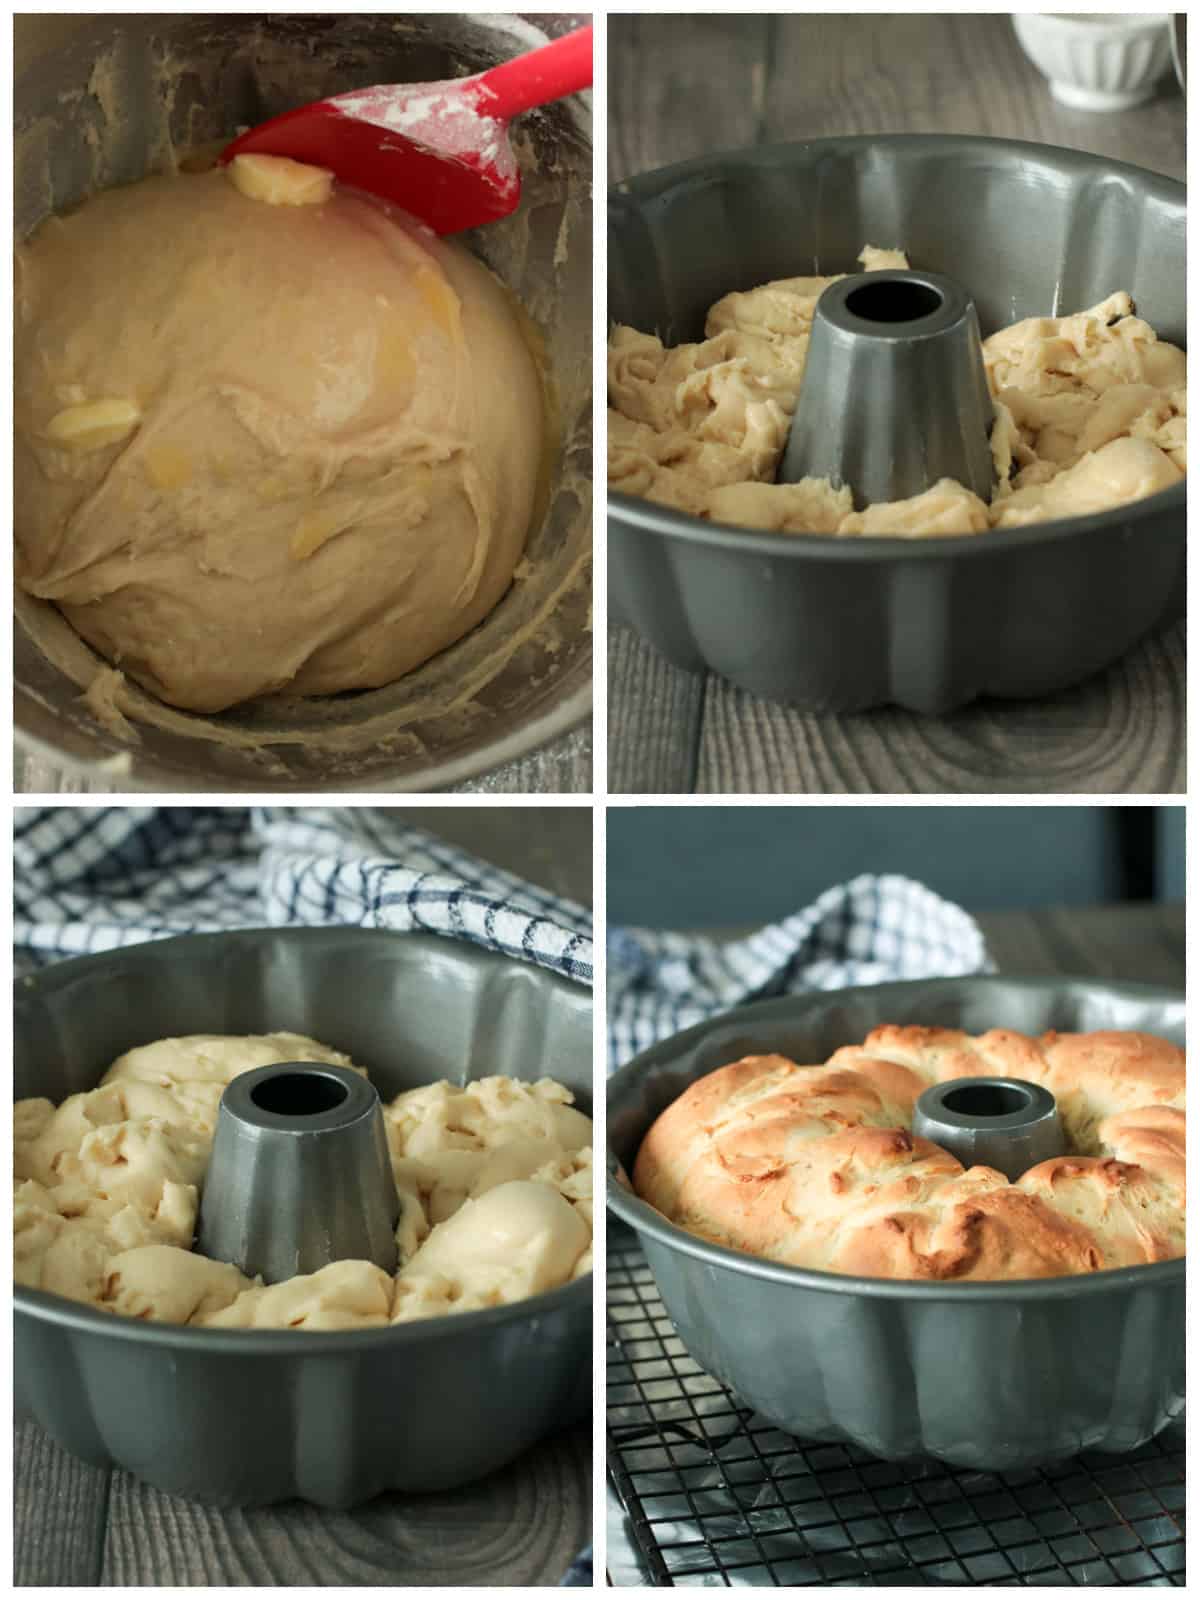 A collage showing the kneaded dough, then filling the bundt pan with the dough. Photos of the proofing and then baking.